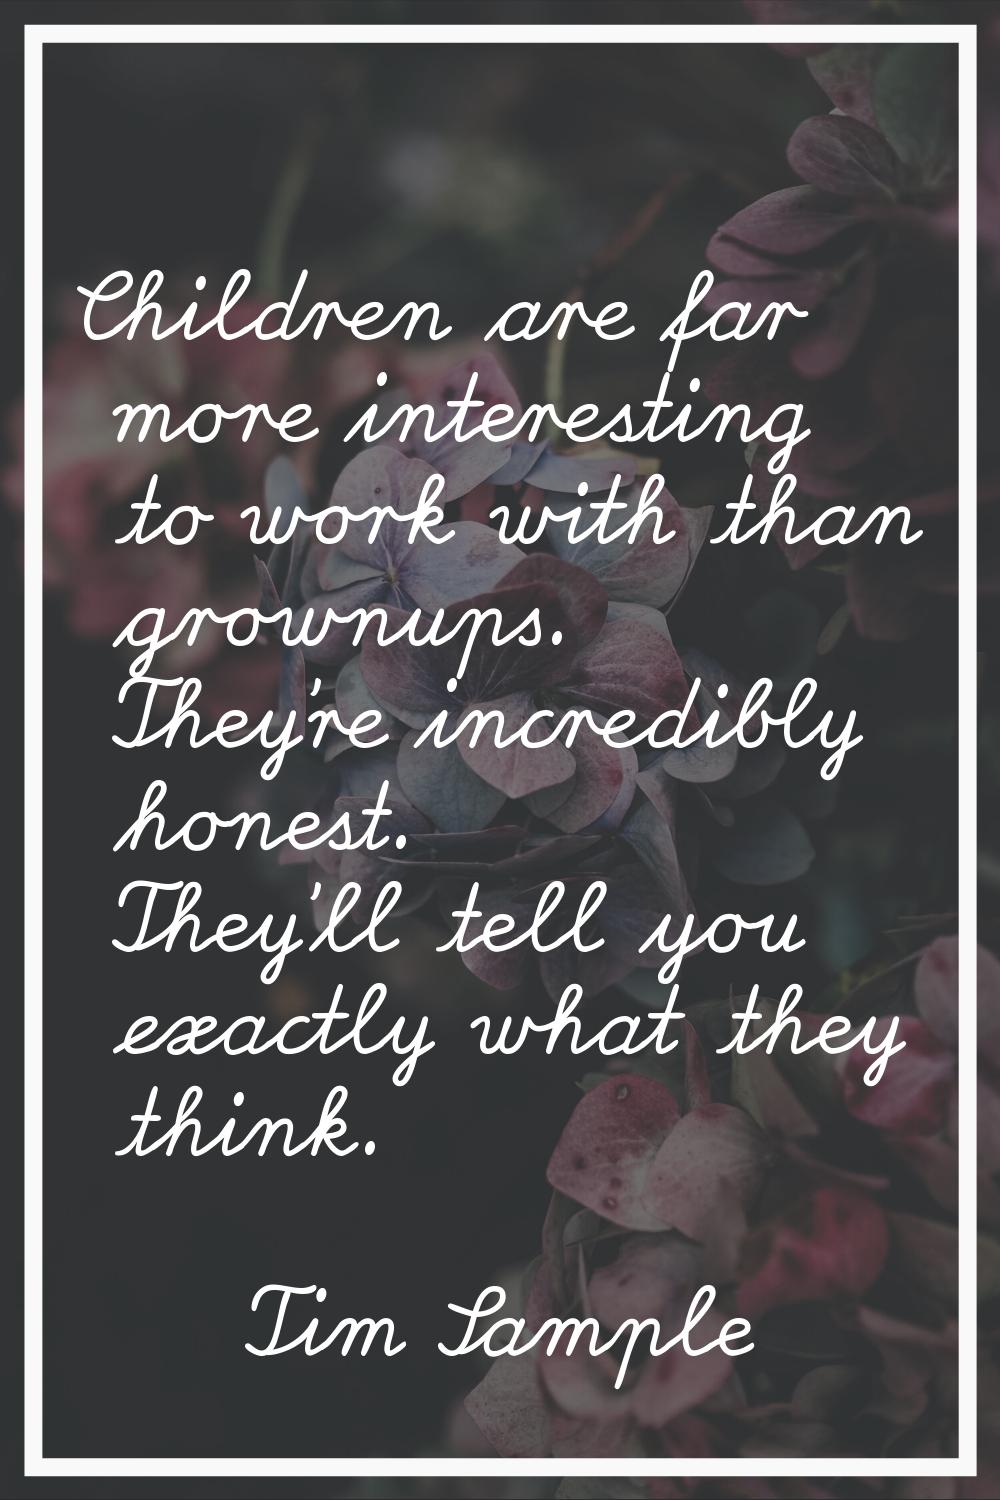 Children are far more interesting to work with than grownups. They're incredibly honest. They'll te